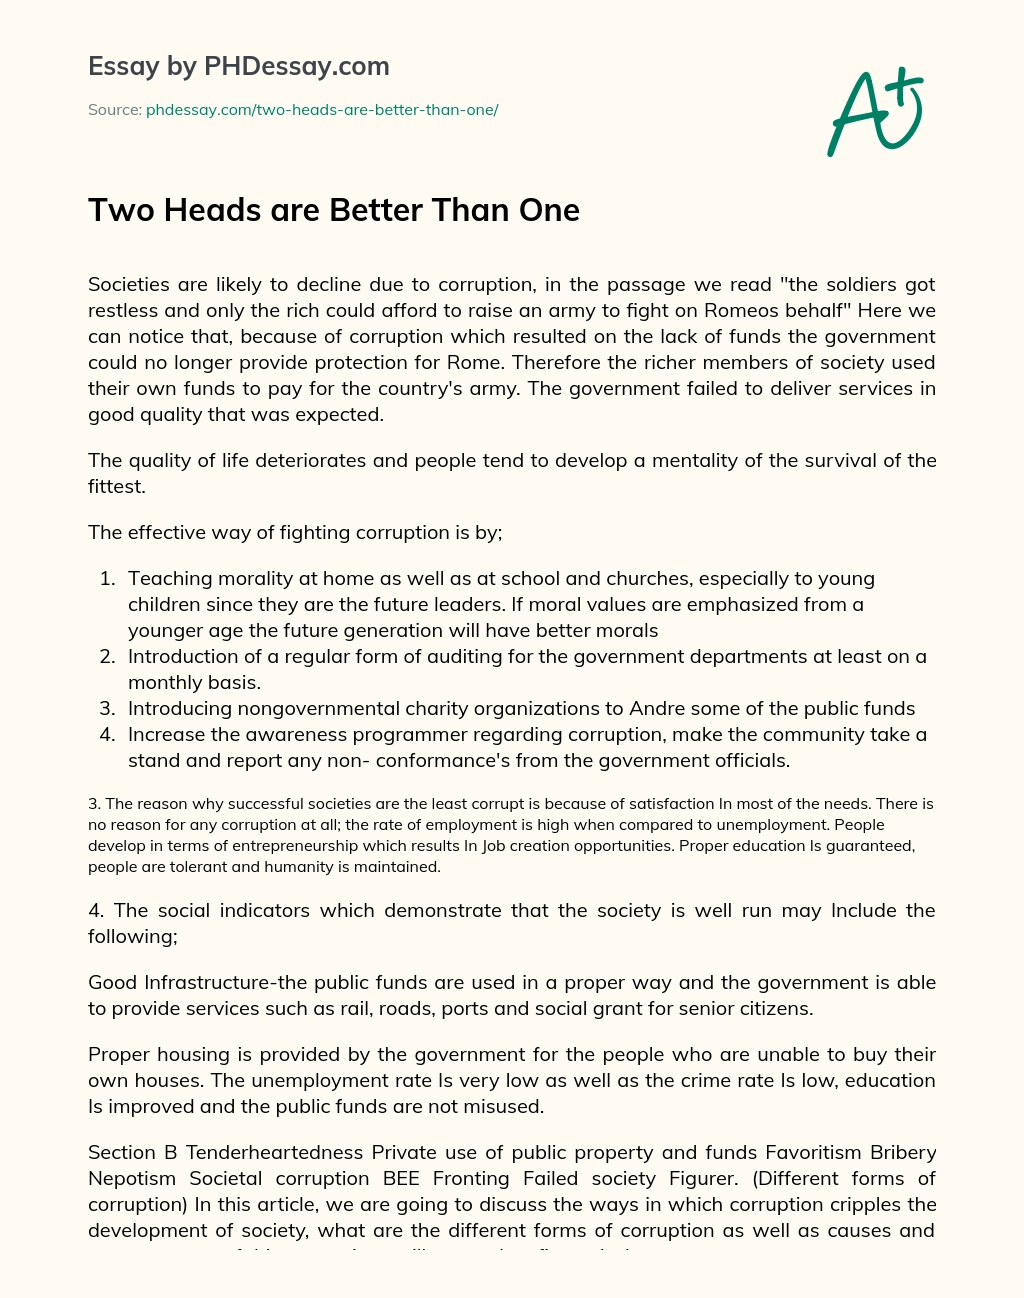 Two Heads are Better Than One essay